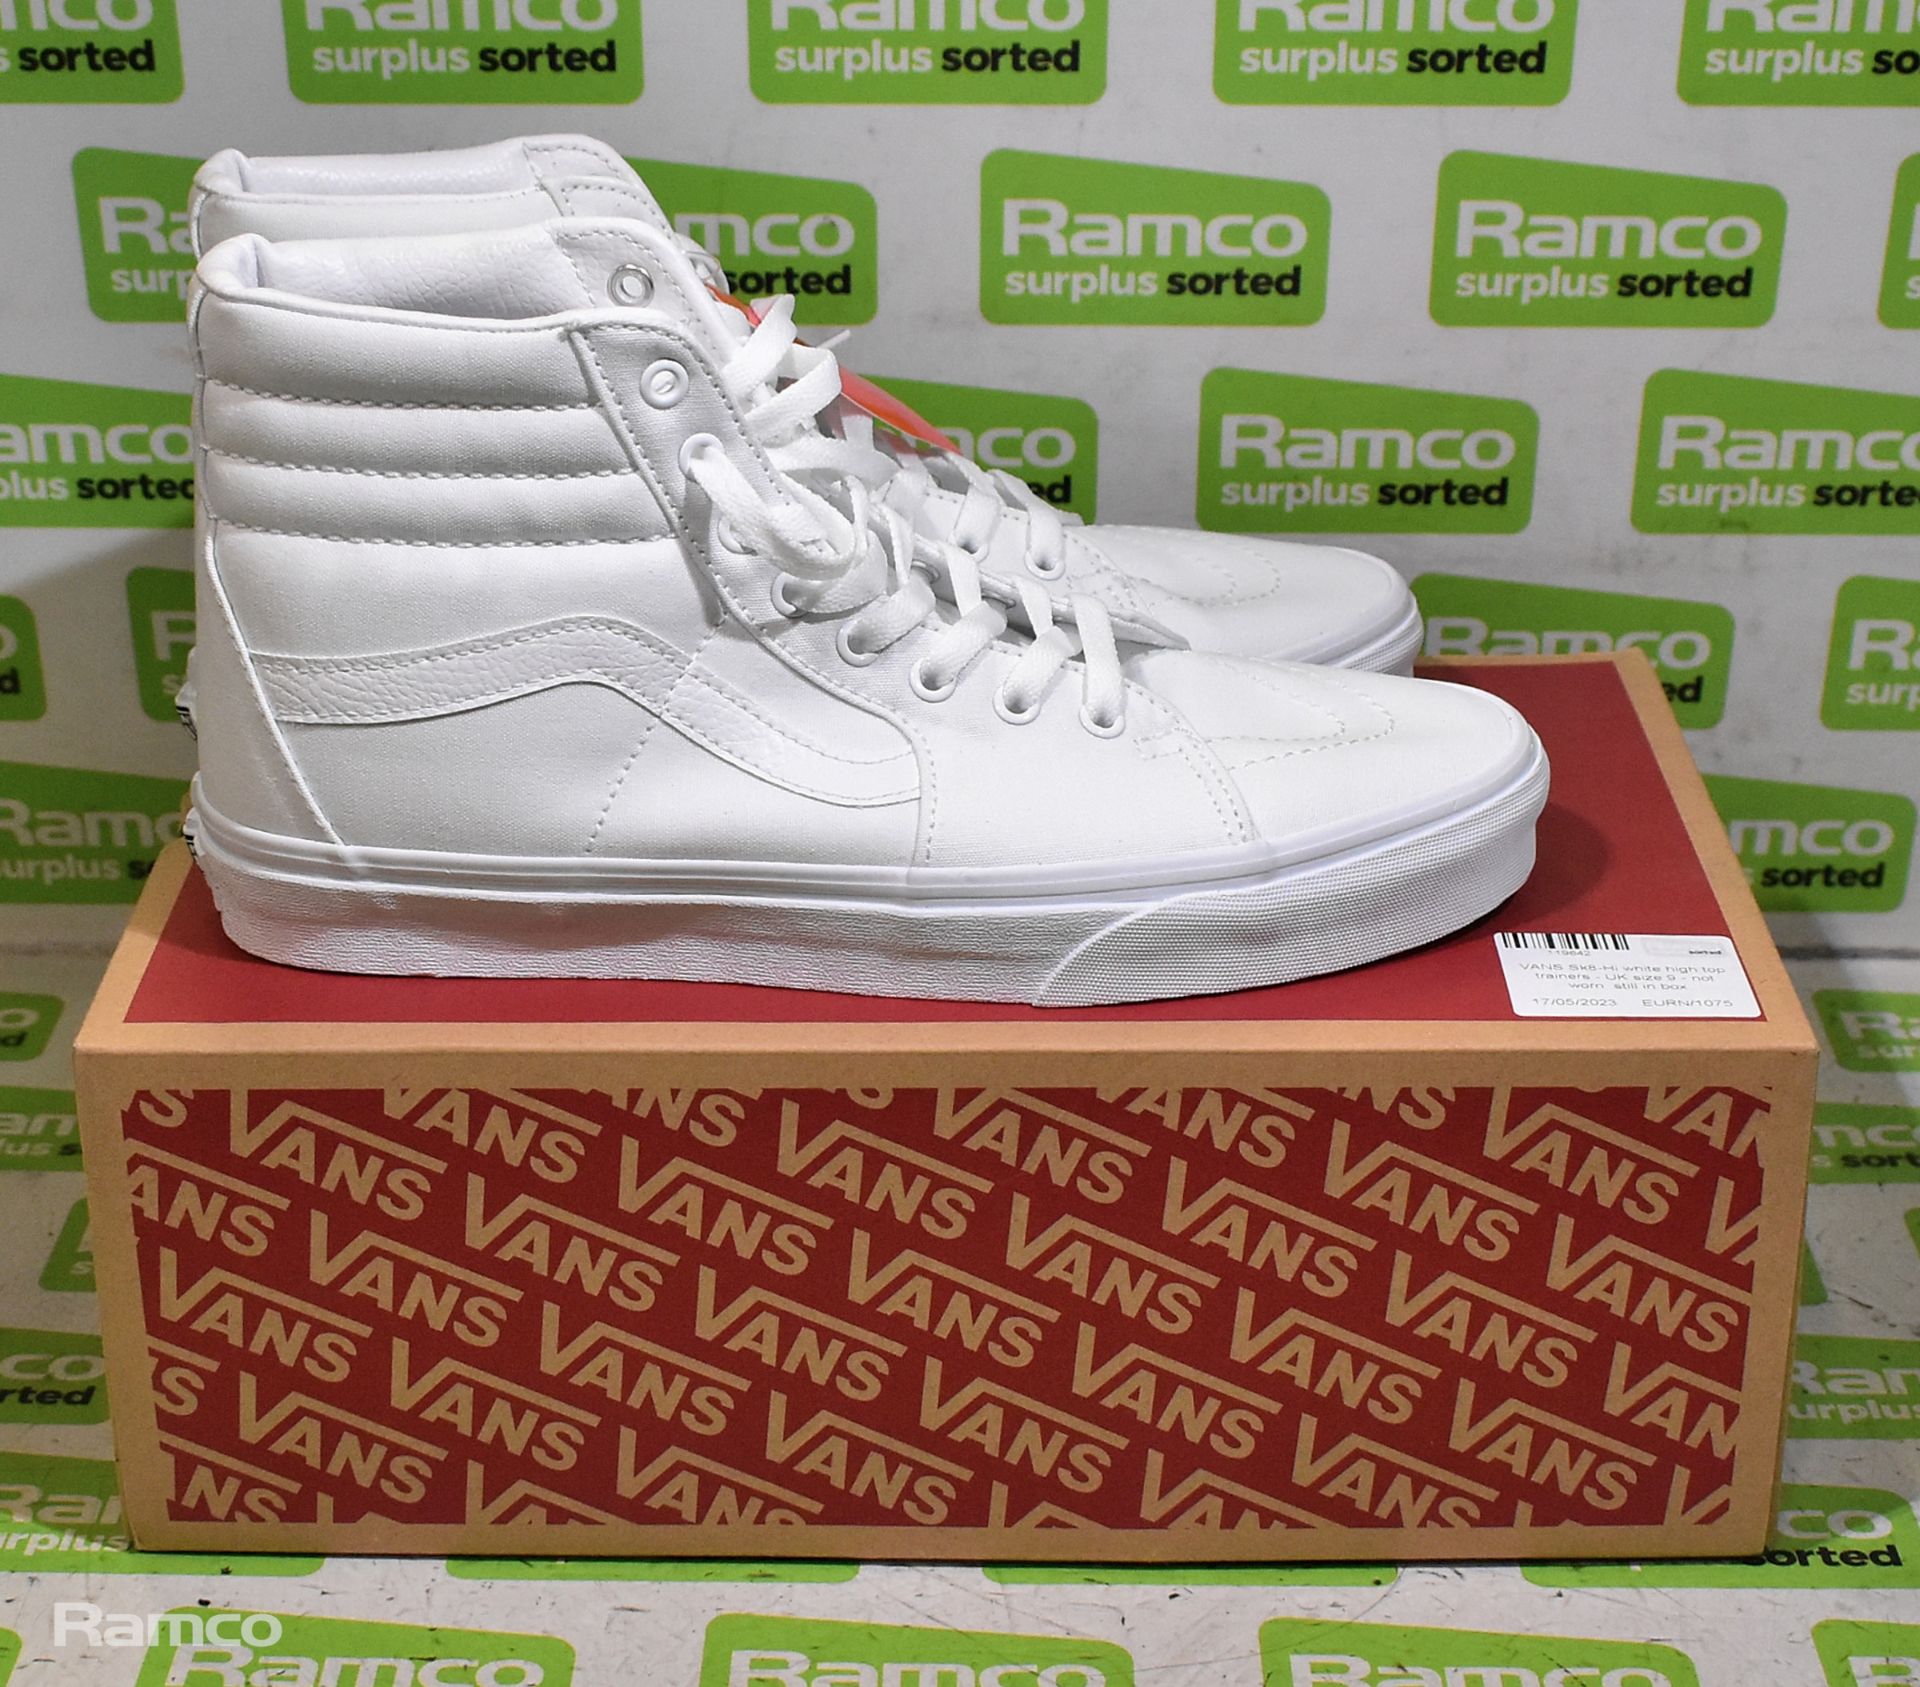 VANS Sk8-Hi white high top trainers - UK size 9 - not worn, still in box - Image 7 of 7